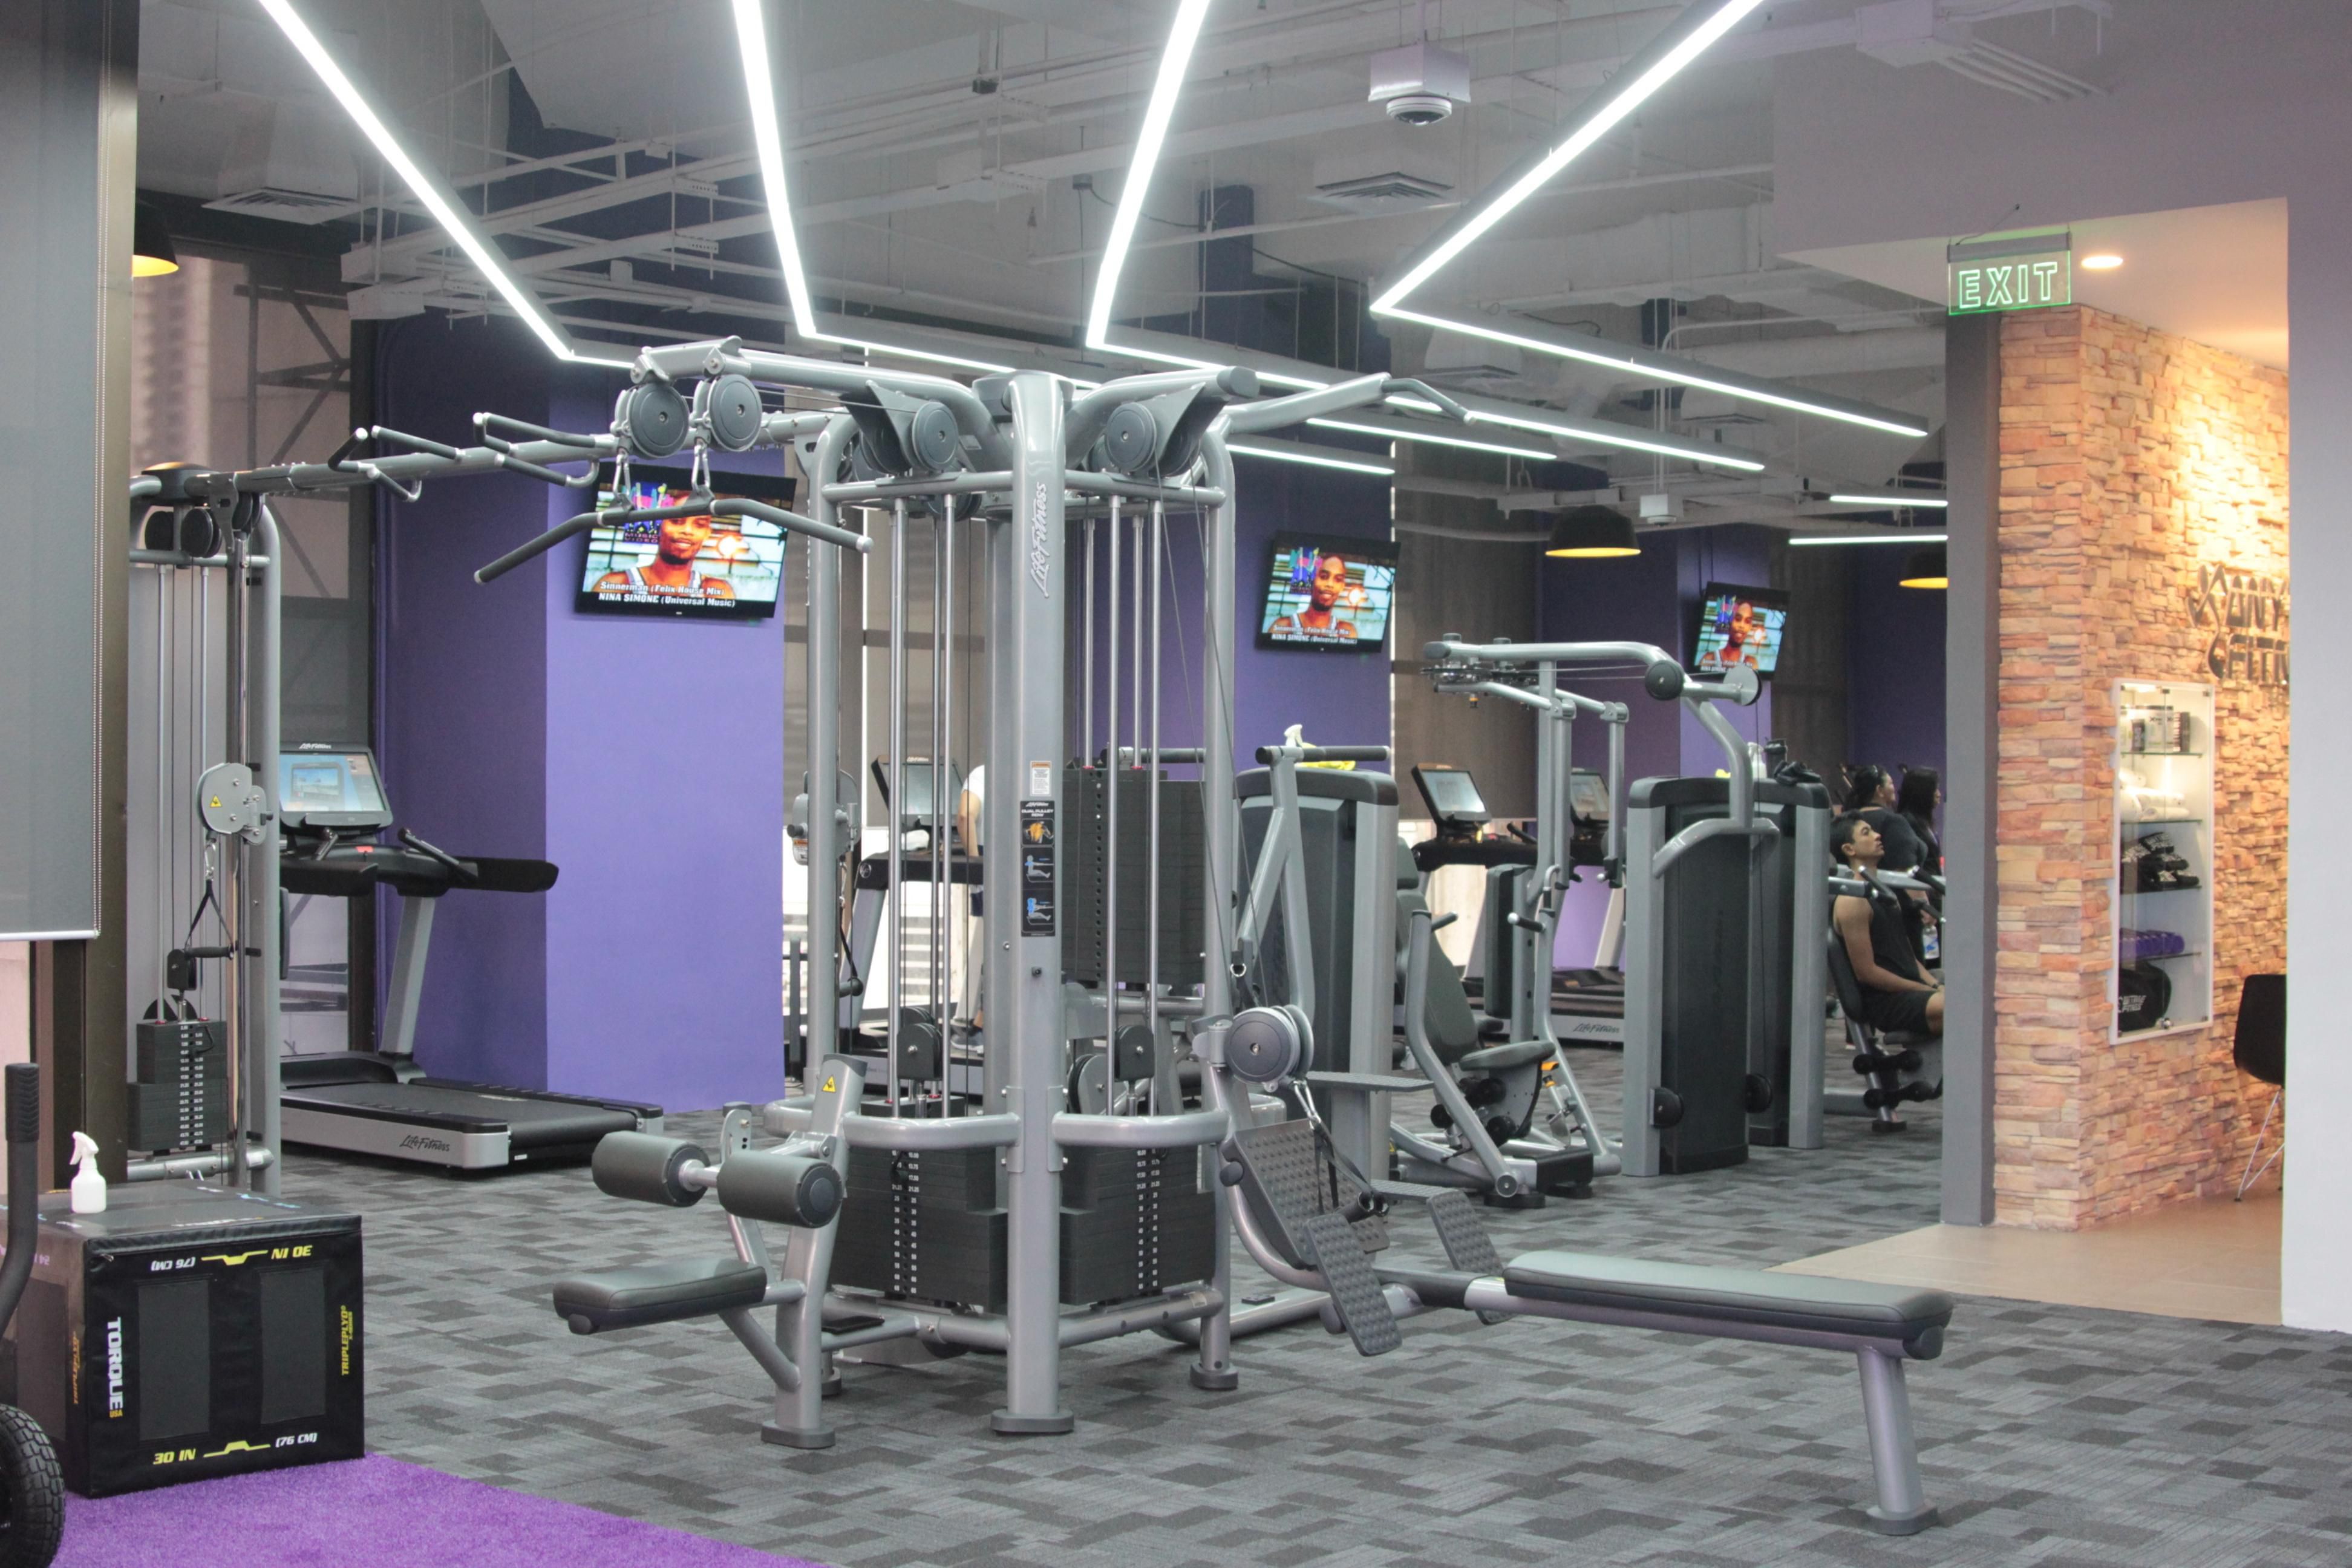 Get pumped up with your work out at our 24x7 state-of-the-art Gym!